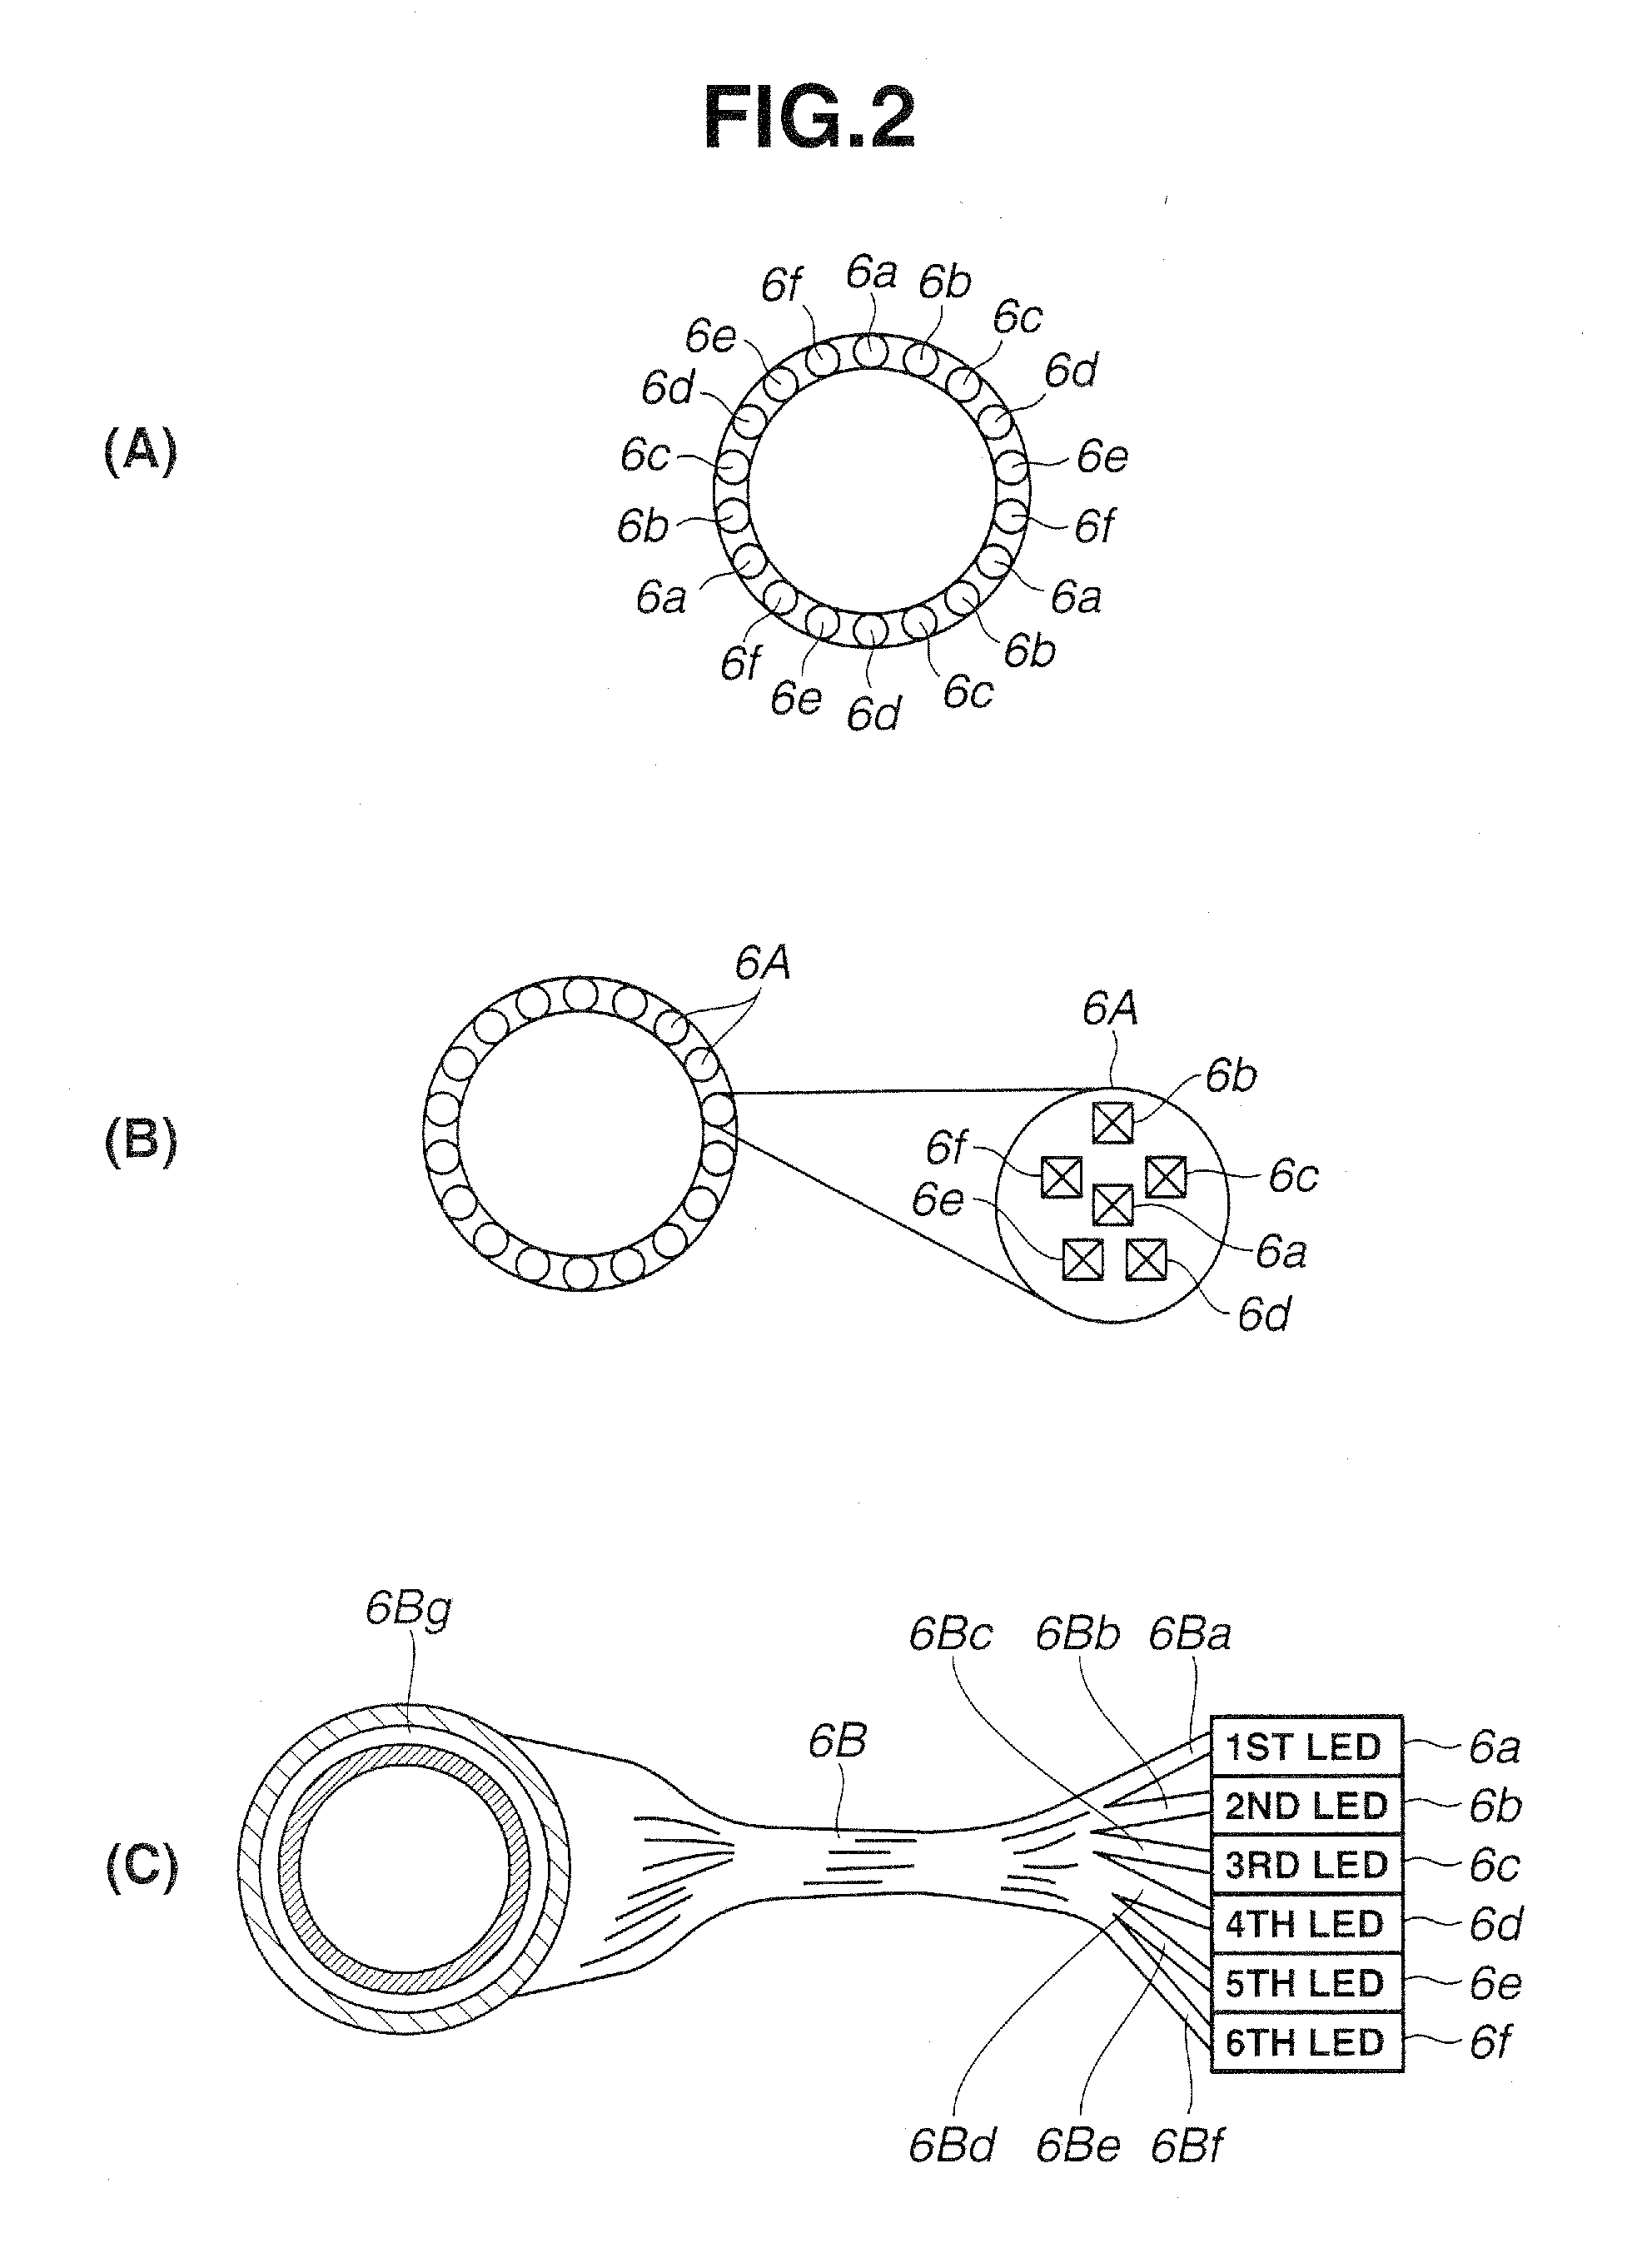 Image processing system which calculates and displays color grade data and display image data